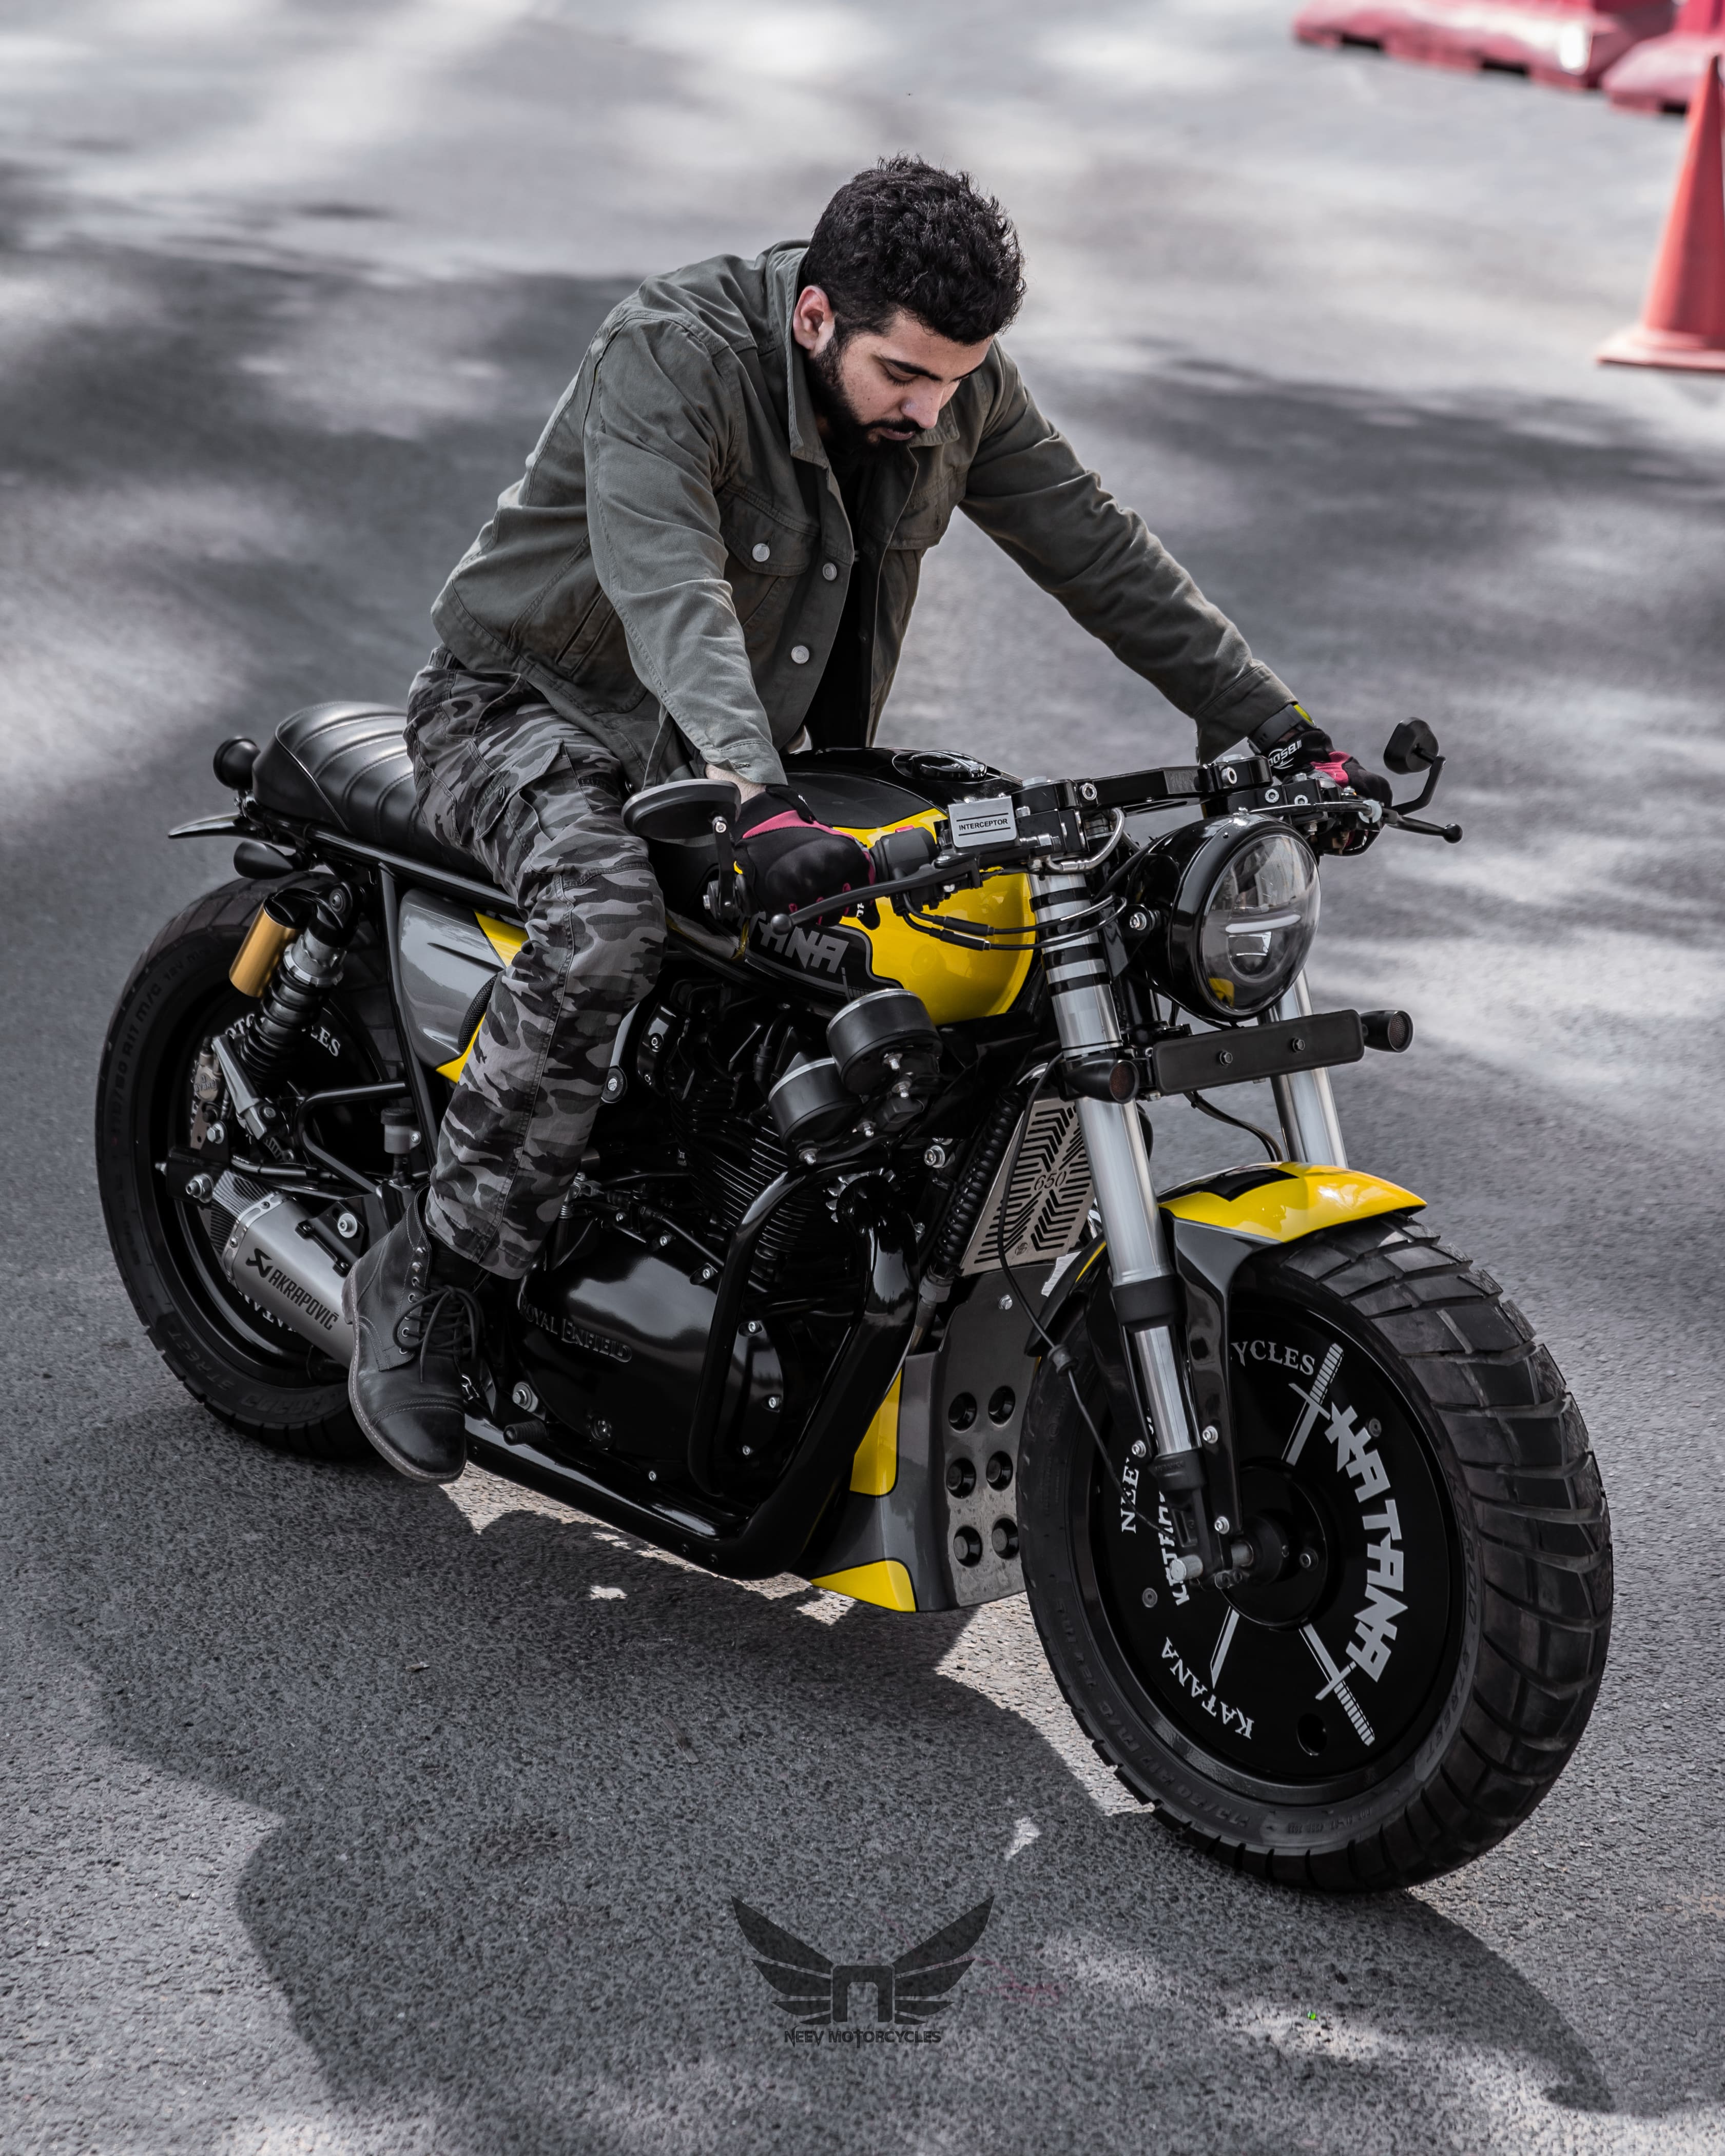 Neev Royal Enfield KATANA 650 Revealed - Details and High-Res Photos - pic